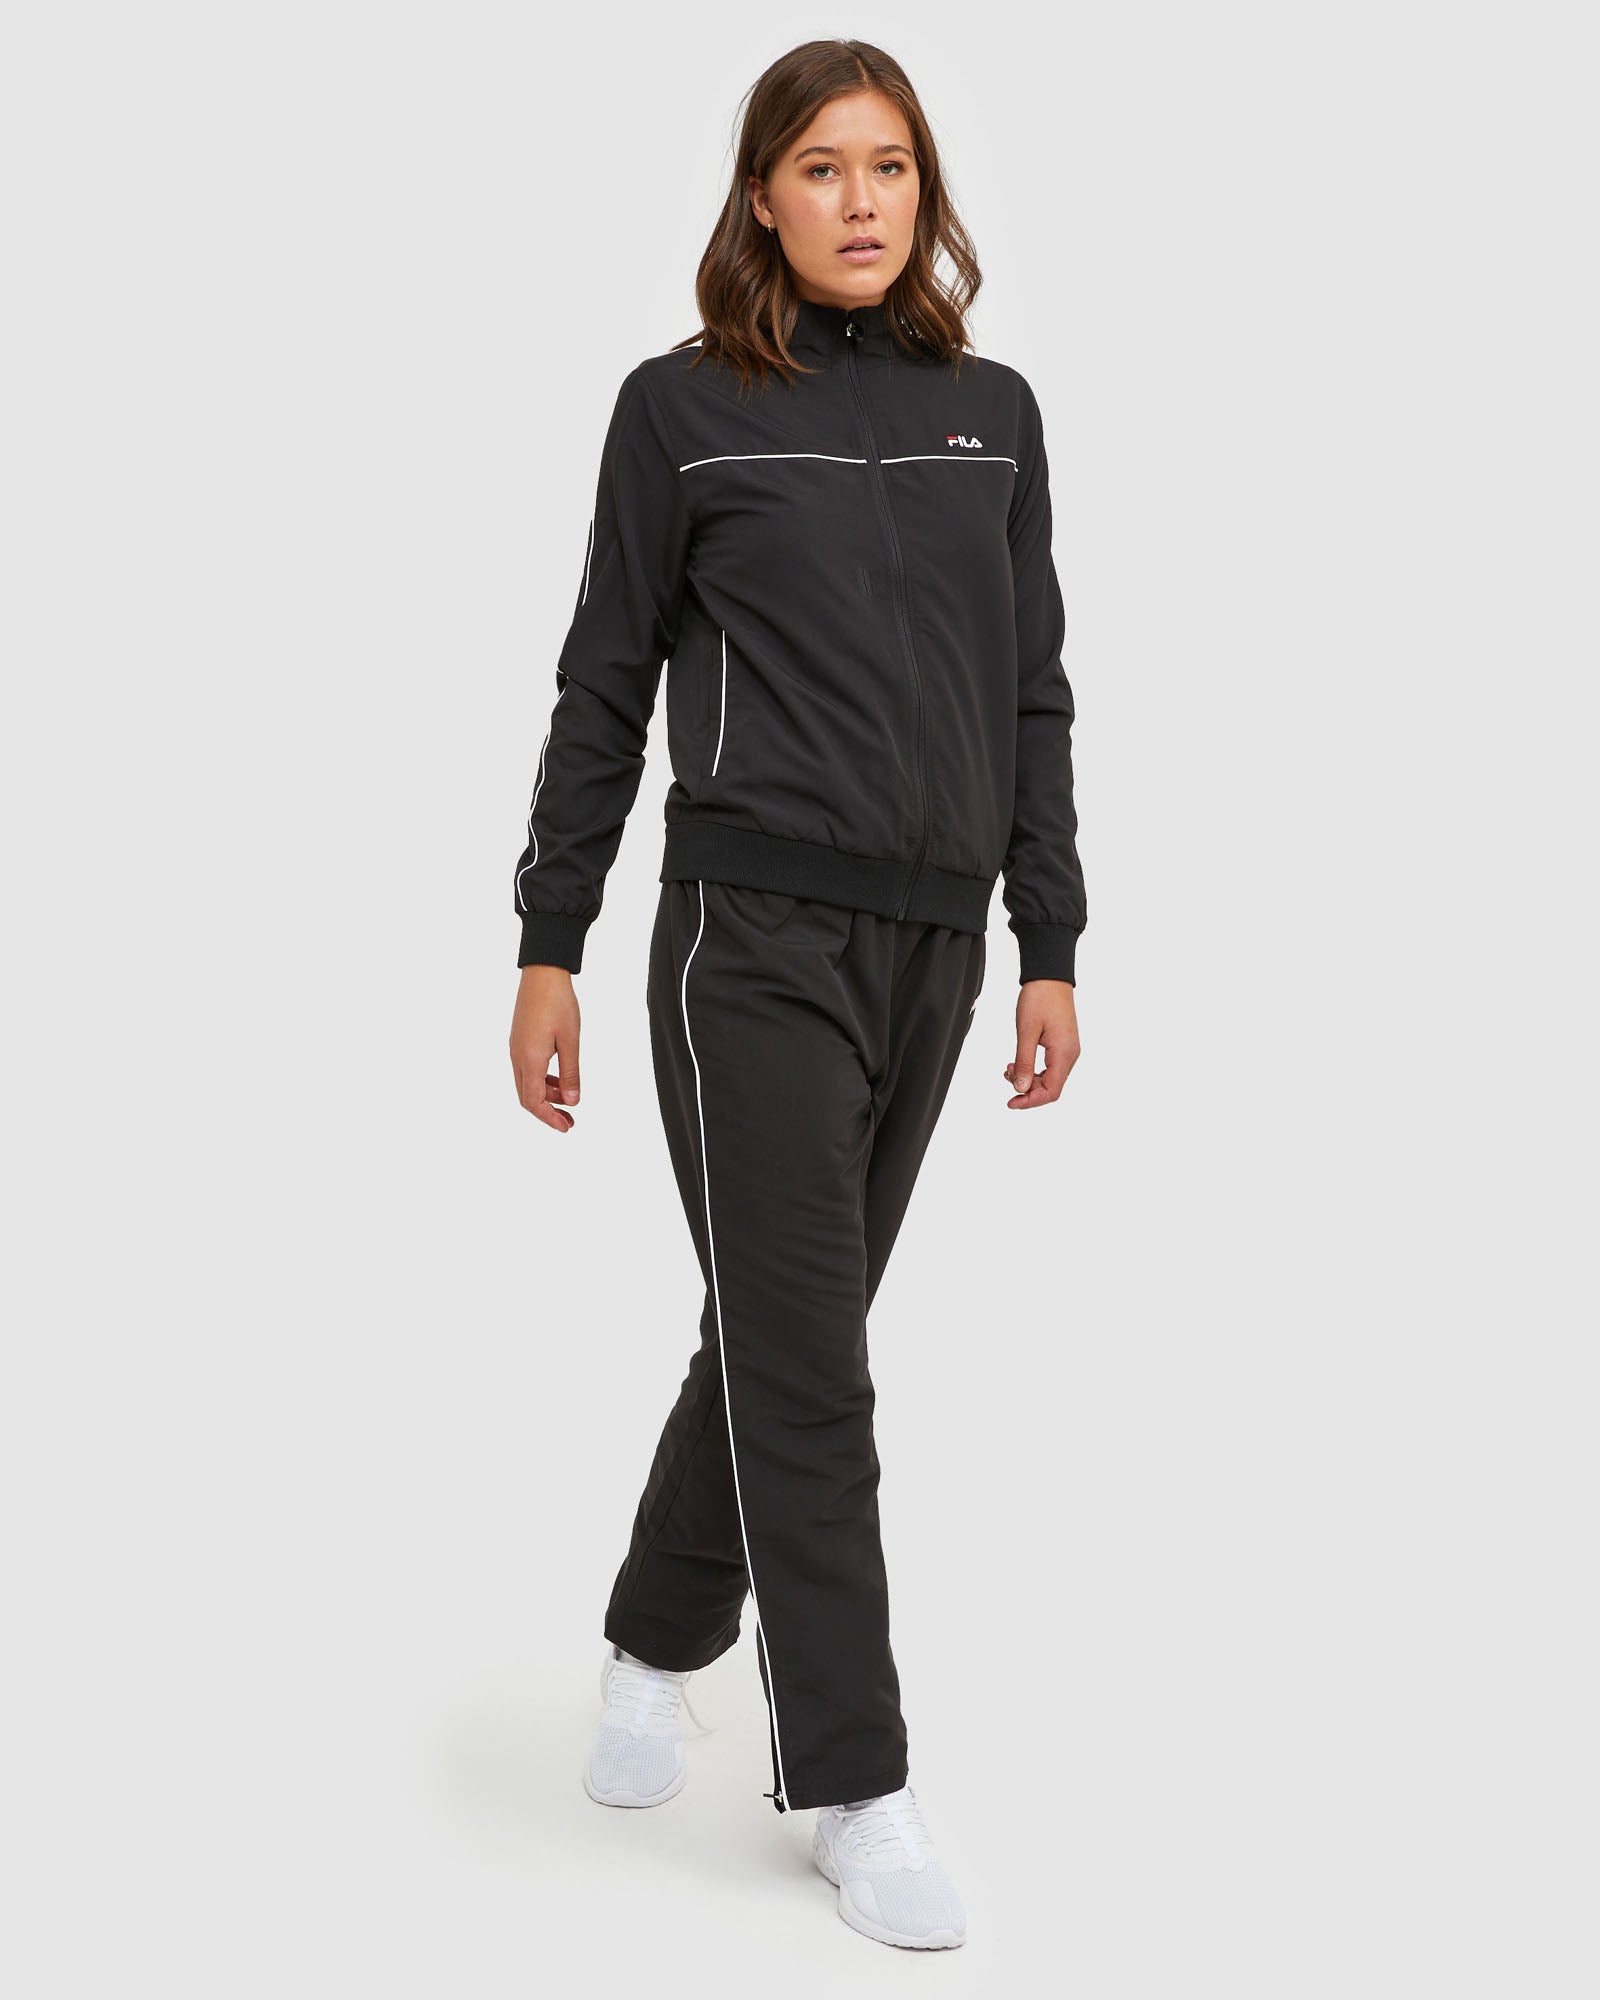 Shop Fila Women's Black Tracksuits up to 80% Off